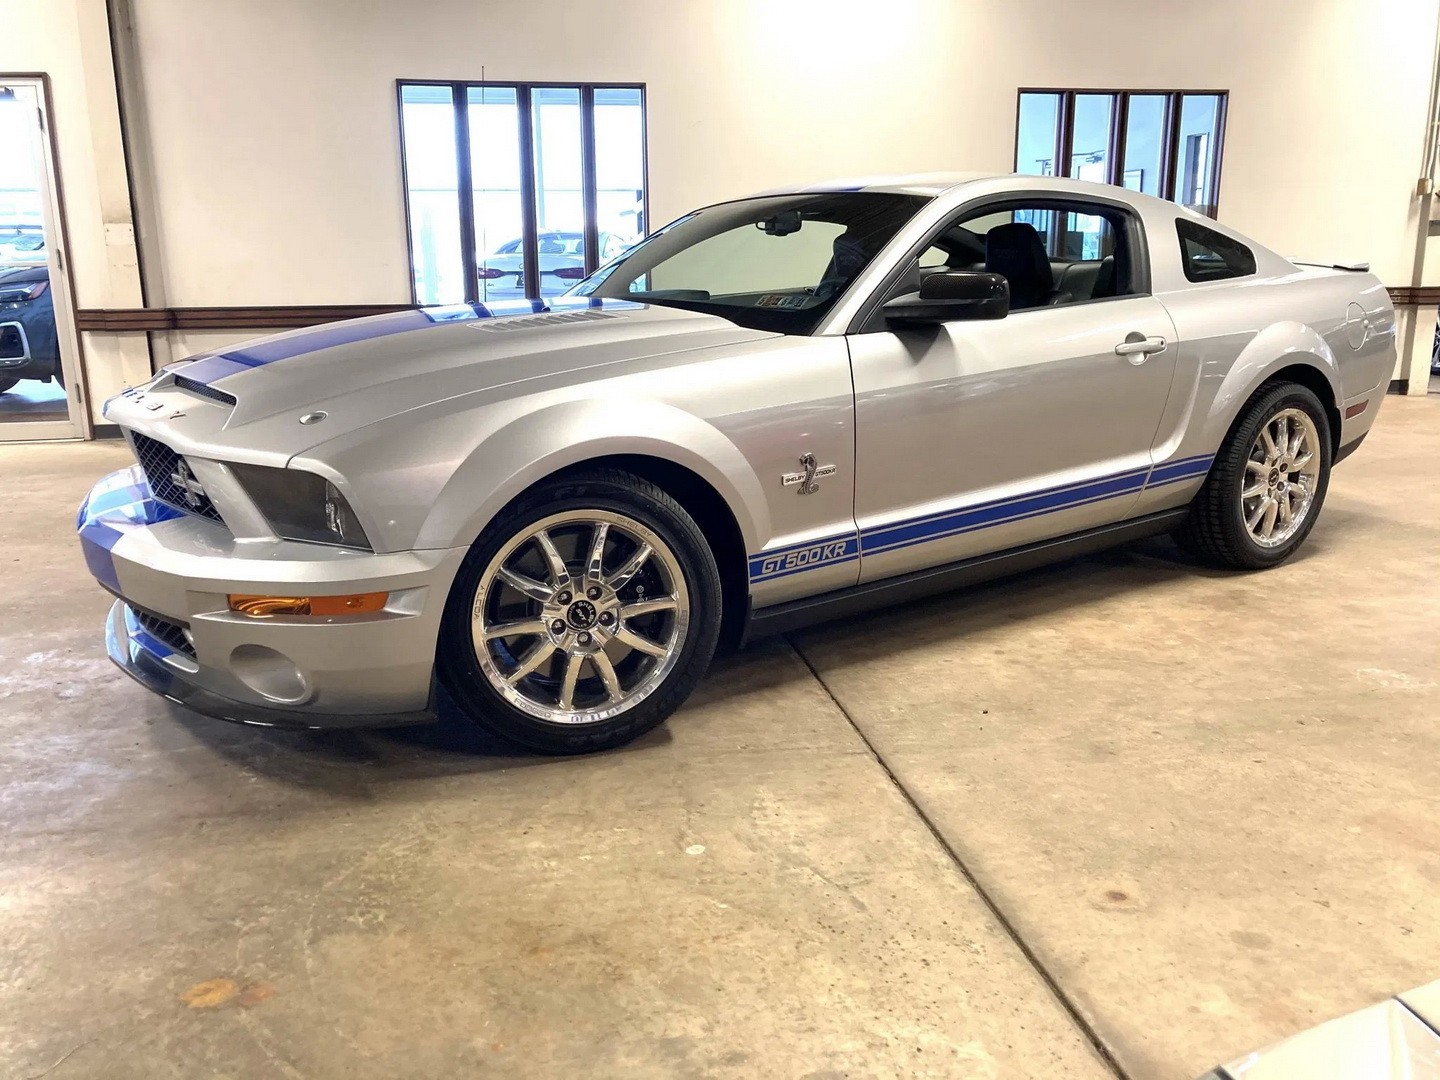 Mustang Of The Day: 2009 Ford Mustang Shelby GT500KR